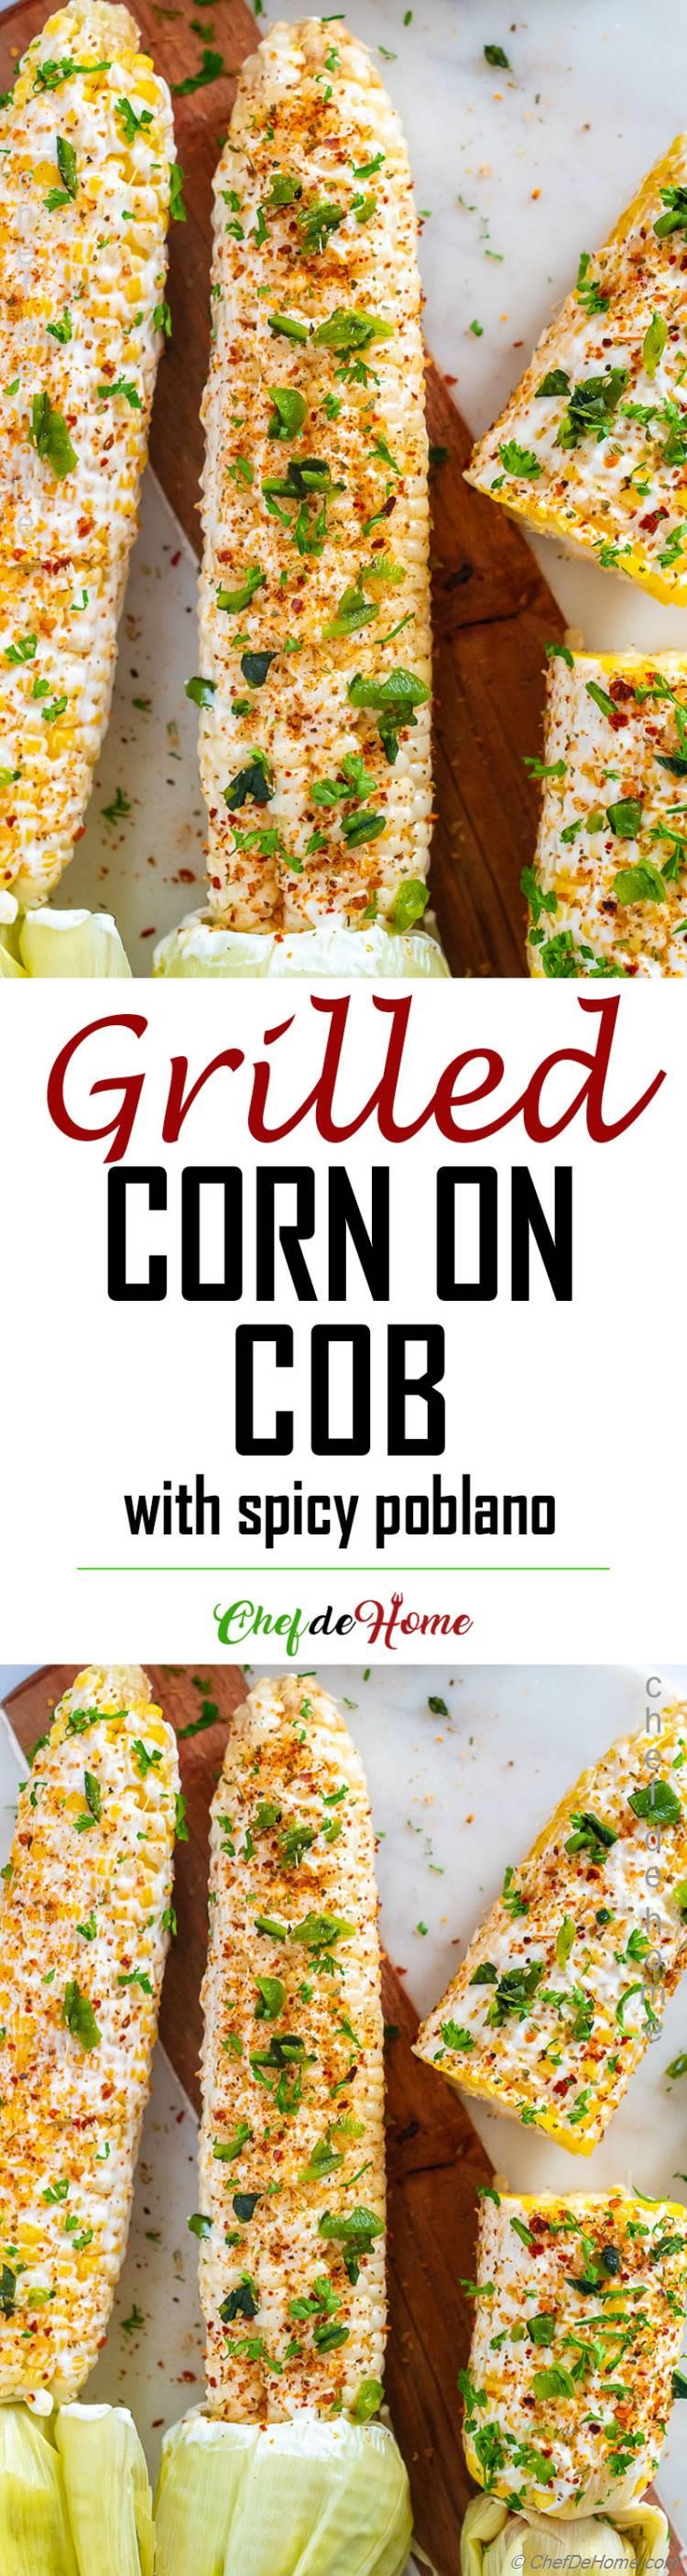 Spicy Grilled Corn Con Cob Grilled in Husk